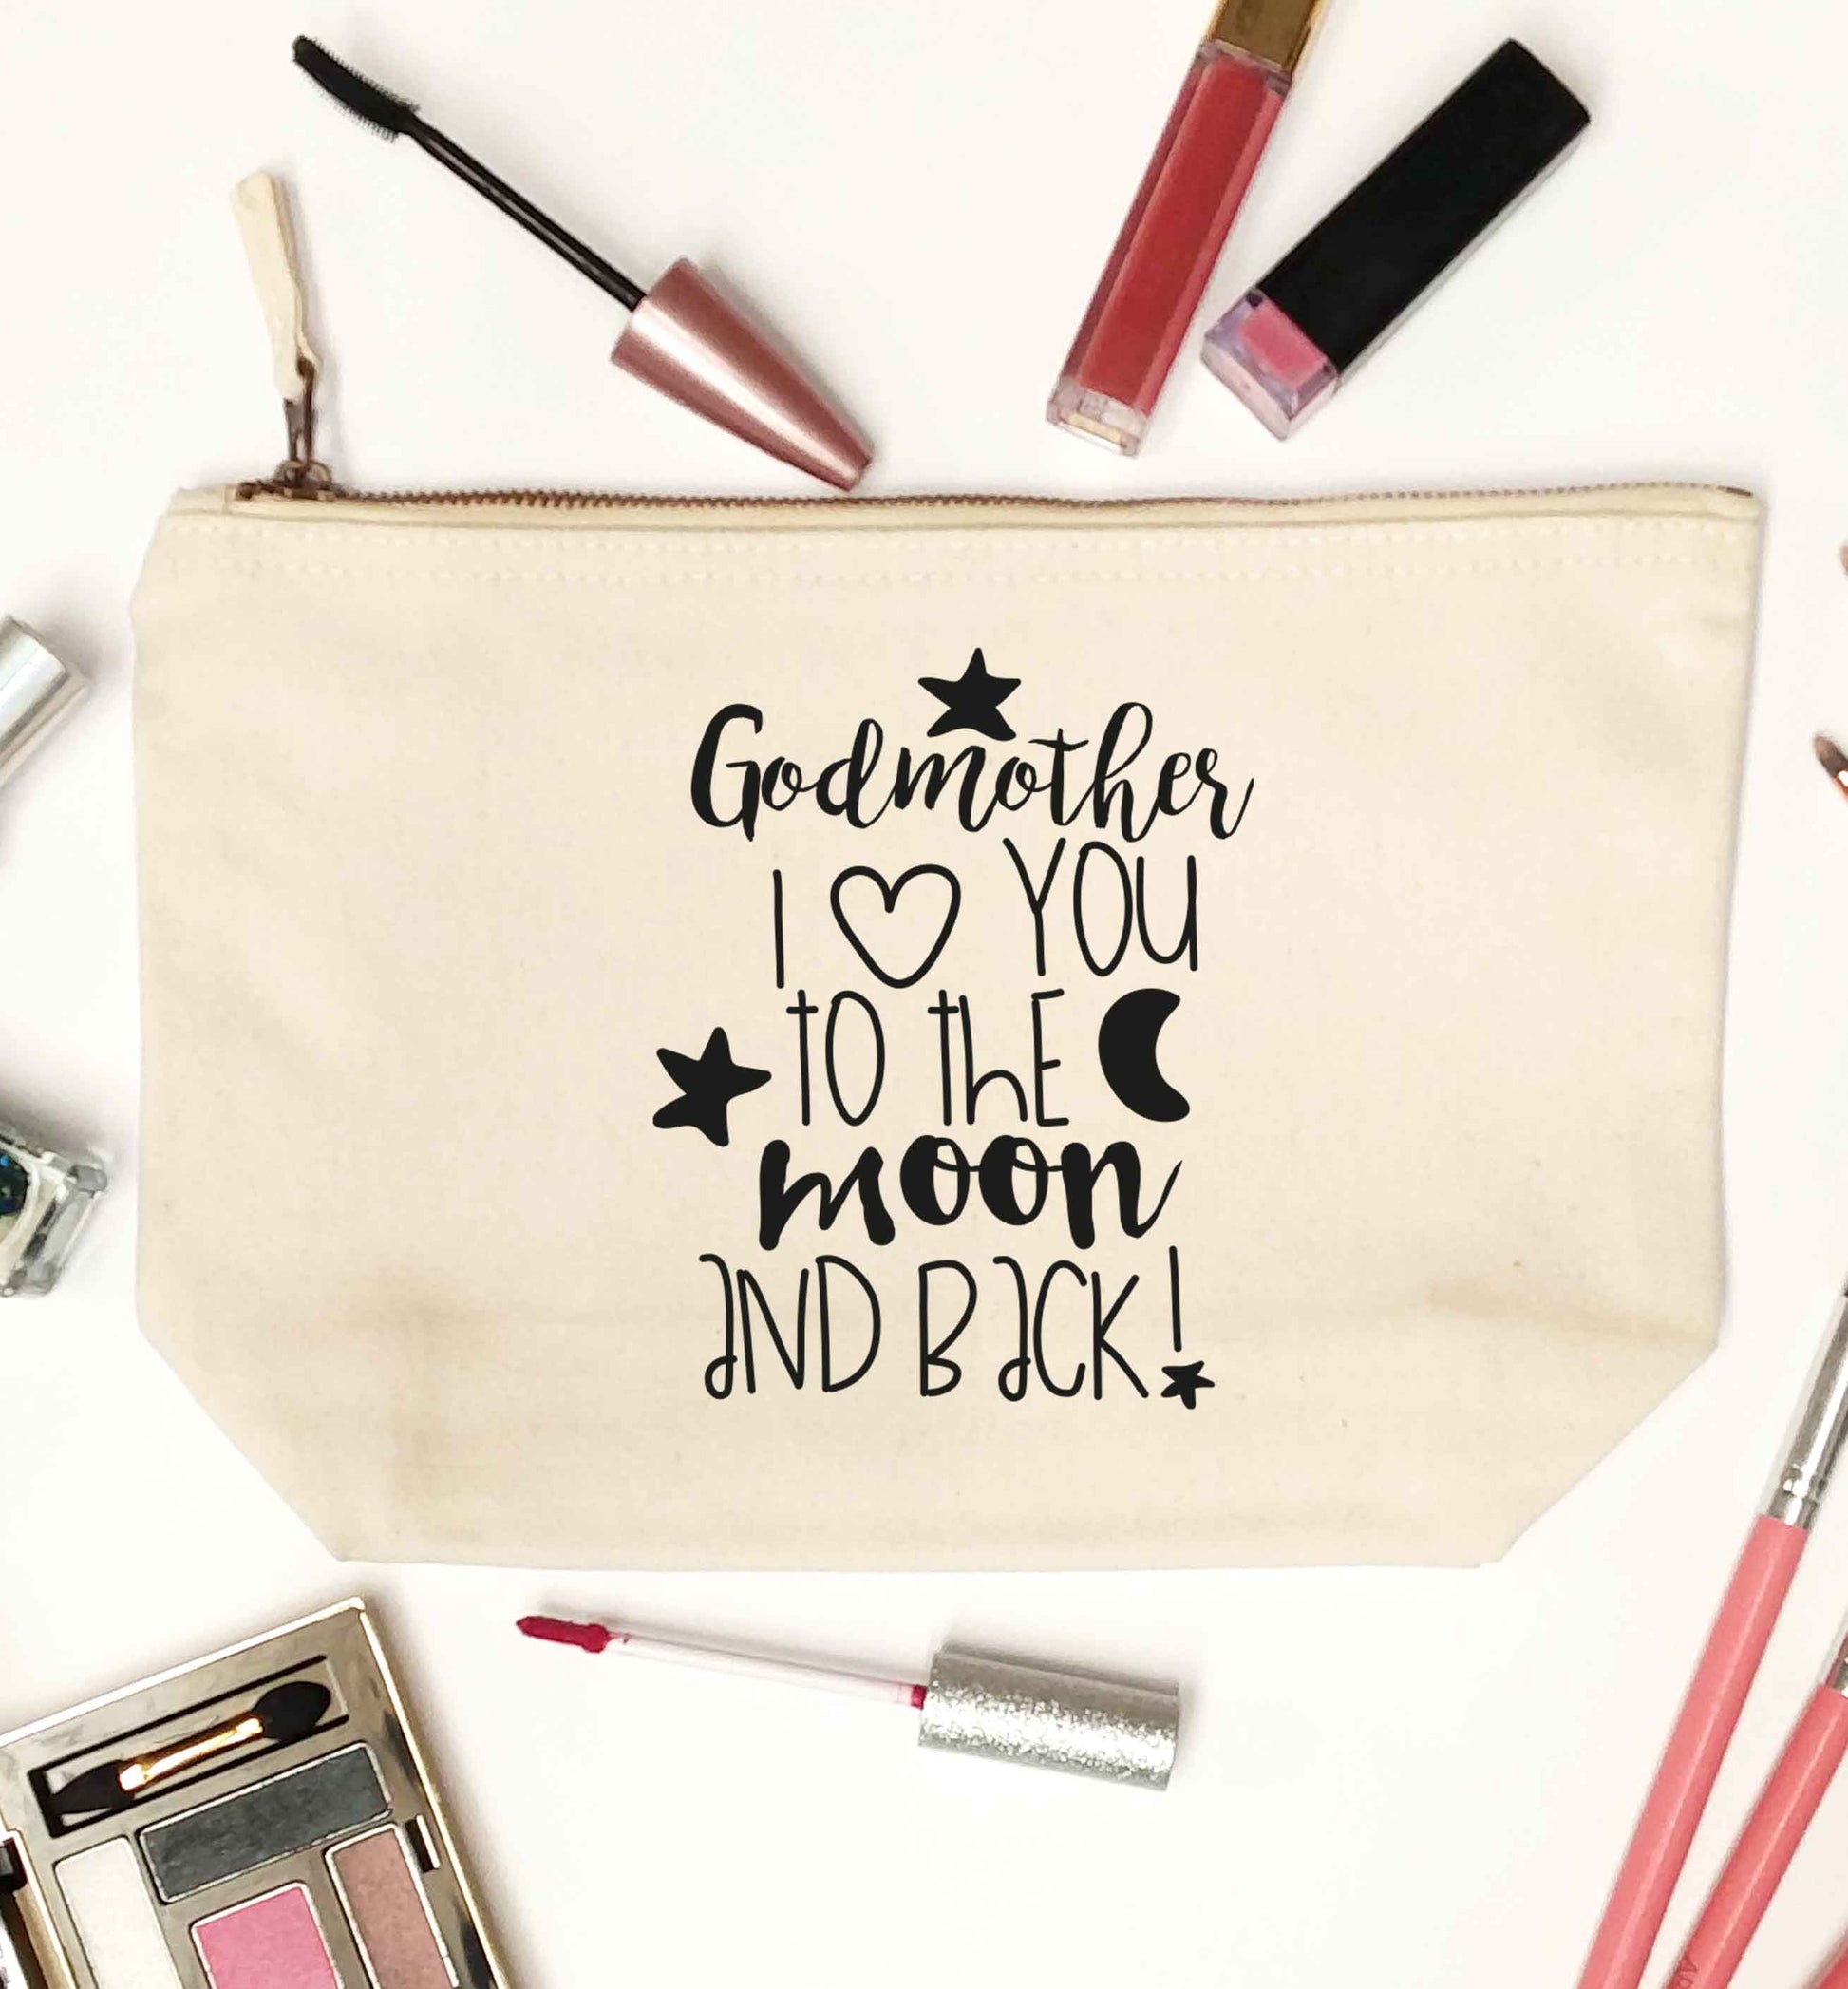 Godmother I love you to the moon and back natural makeup bag